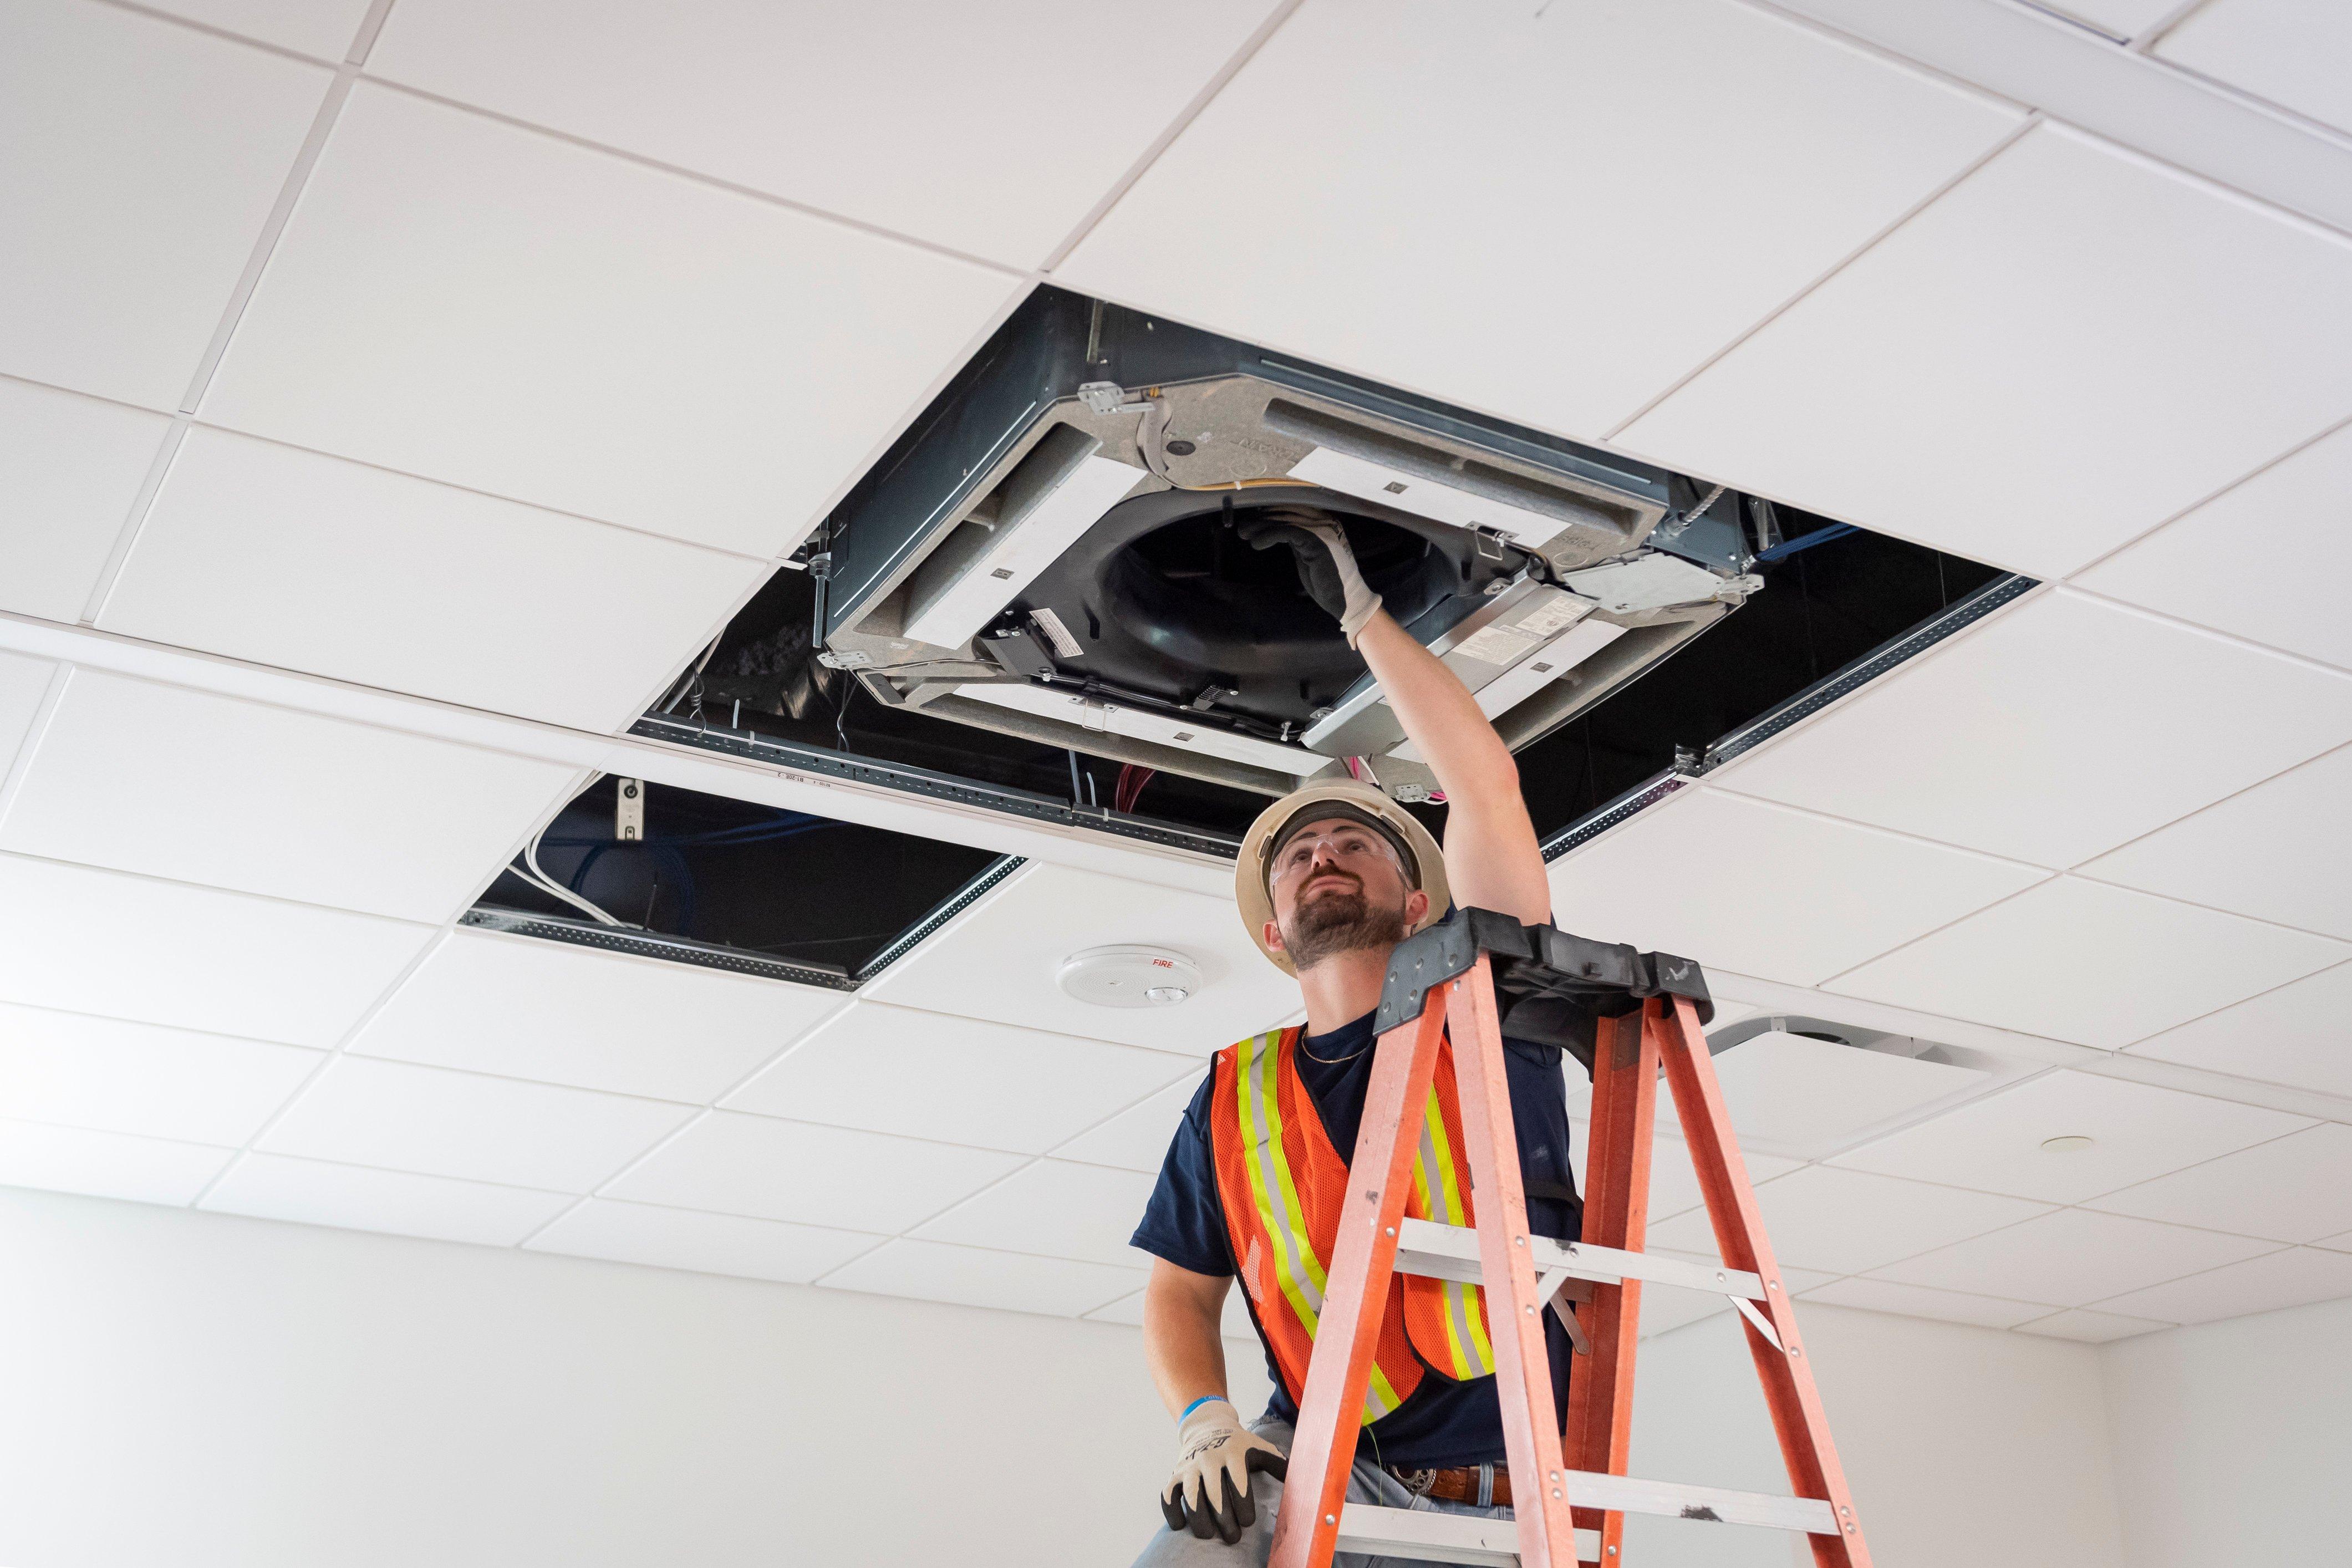 An HVAC technician on an orange ladder works on a ceiling cassette in a commercial building.